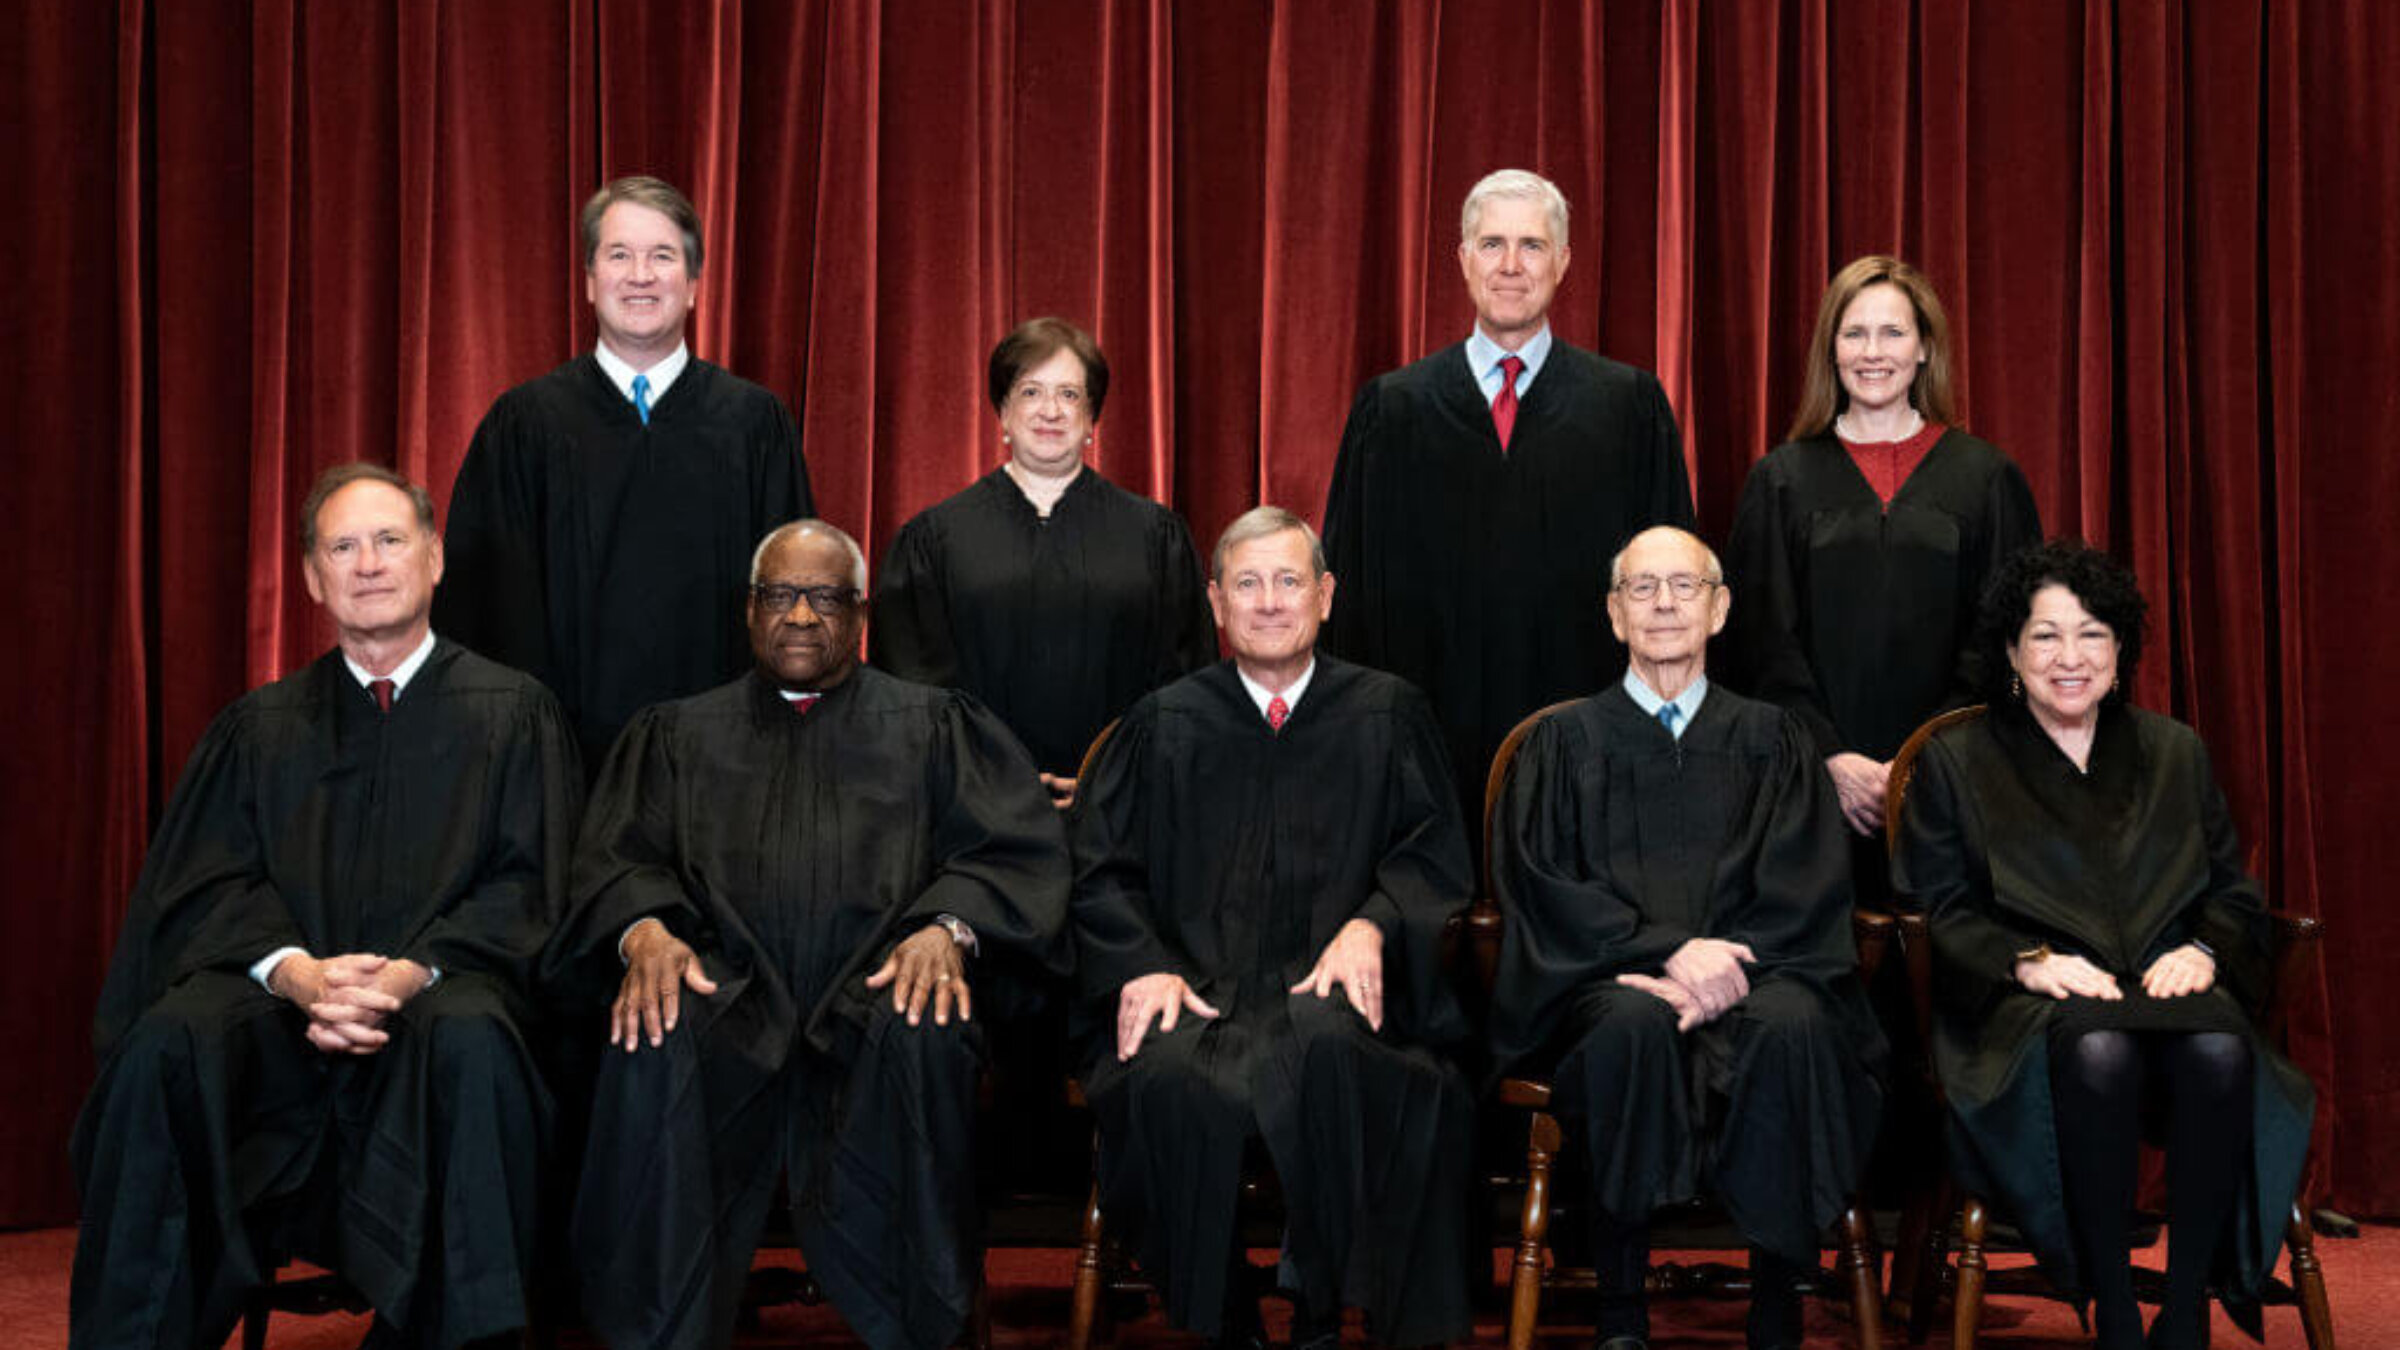 Members of the Supreme Court pose for a group photo at the Supreme Court in Washington, DC on April 23, 2021. Seated from left: Associate Justice Samuel Alito, Associate Justice Clarence Thomas, Chief Justice John Roberts, Associate Justice Stephen Breyer and Associate Justice Sonia Sotomayor. Standing from left: Associate Justice Brett Kavanaugh, Associate Justice Elena Kagan, Associate Justice Neil Gorsuch and Associate Justice Amy Coney Barrett.